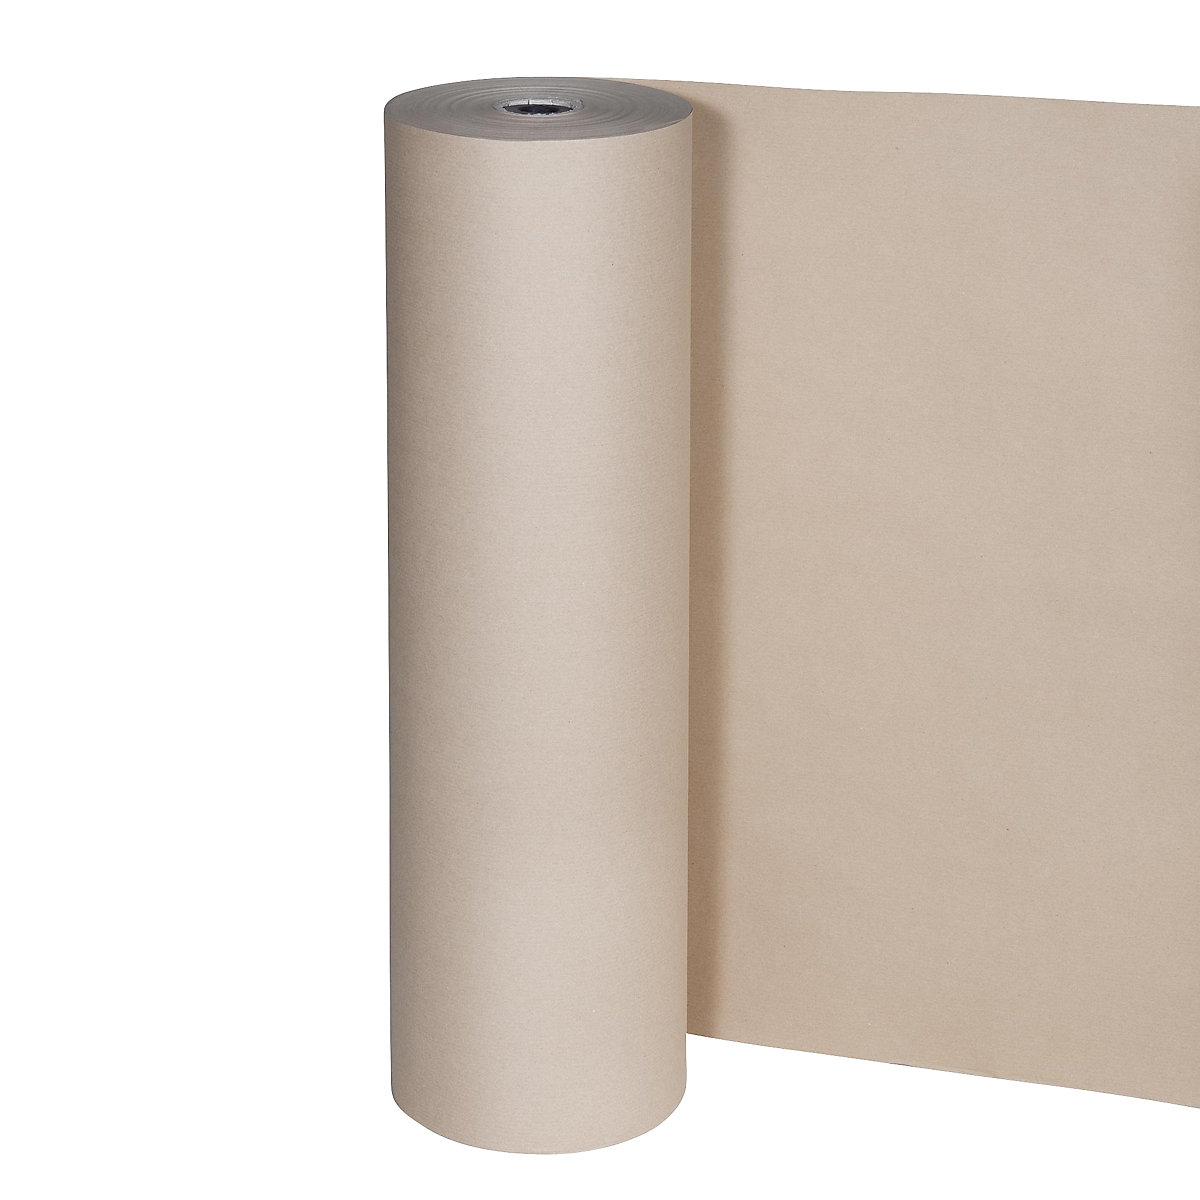 Packing paper, 80 g/m², Secare roll, 750 mm wide, pack of 2 rolls-3